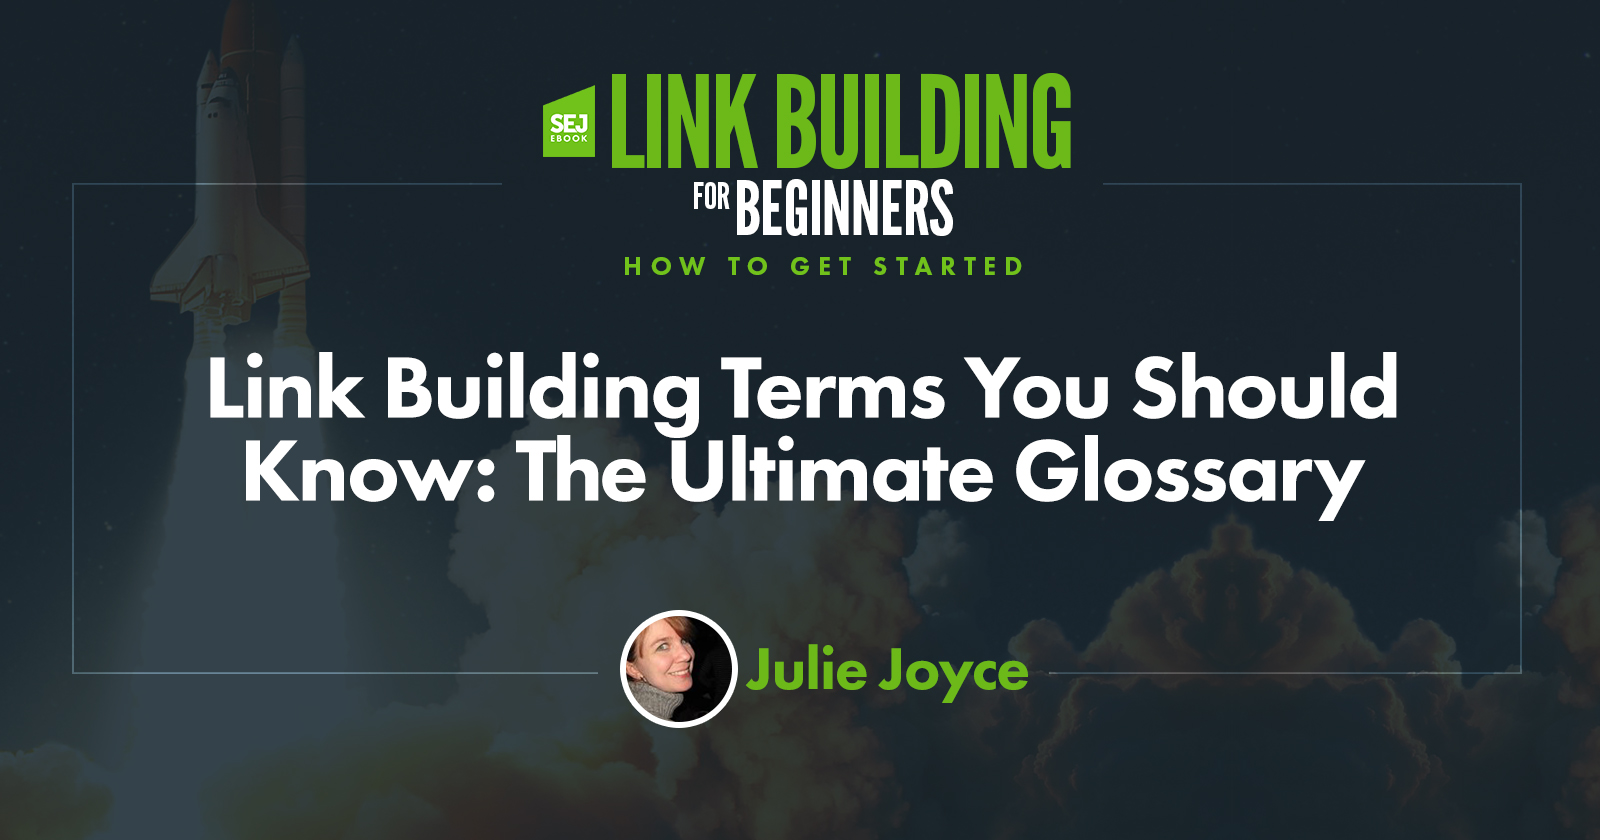 Link Building Terms You Should Know - The Ultimate Glossary